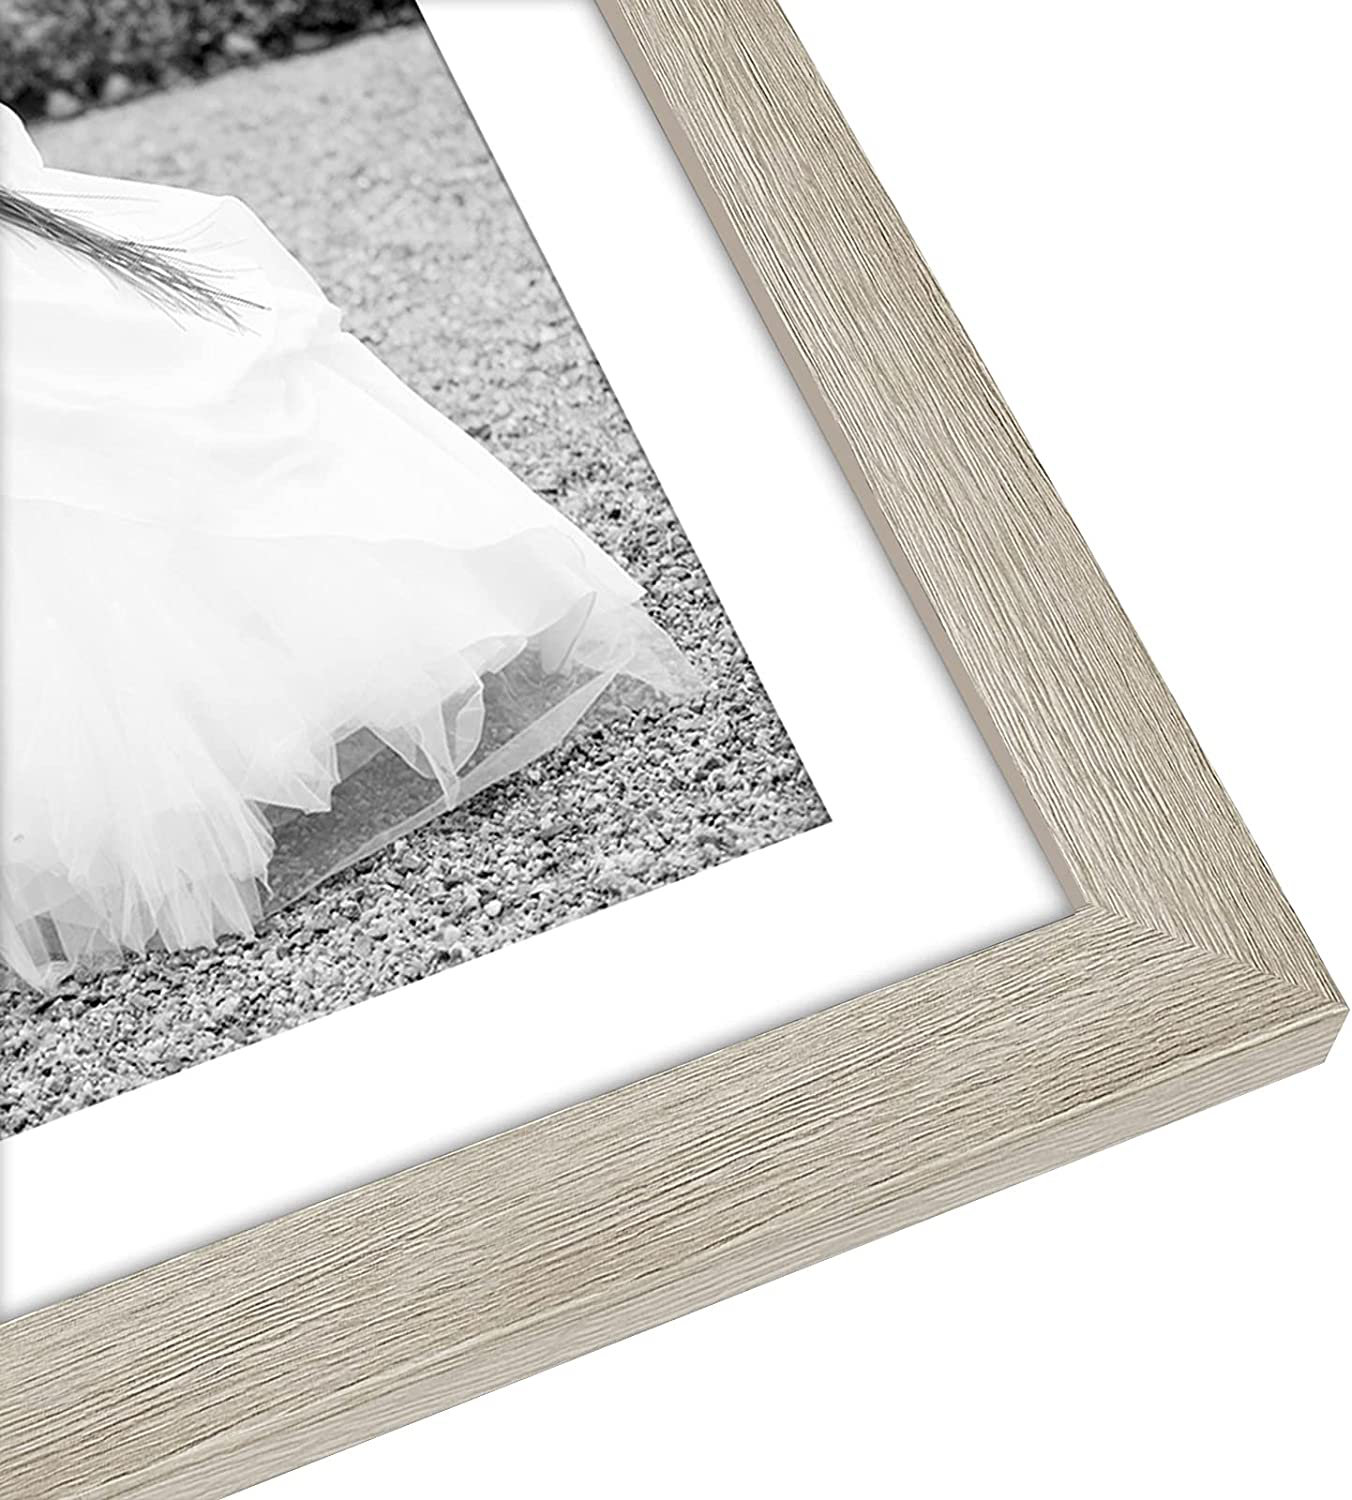 Americanflat 11 x 14 Picture Frame with 8 x 10 Mat - Wood with Glass Cover - Black